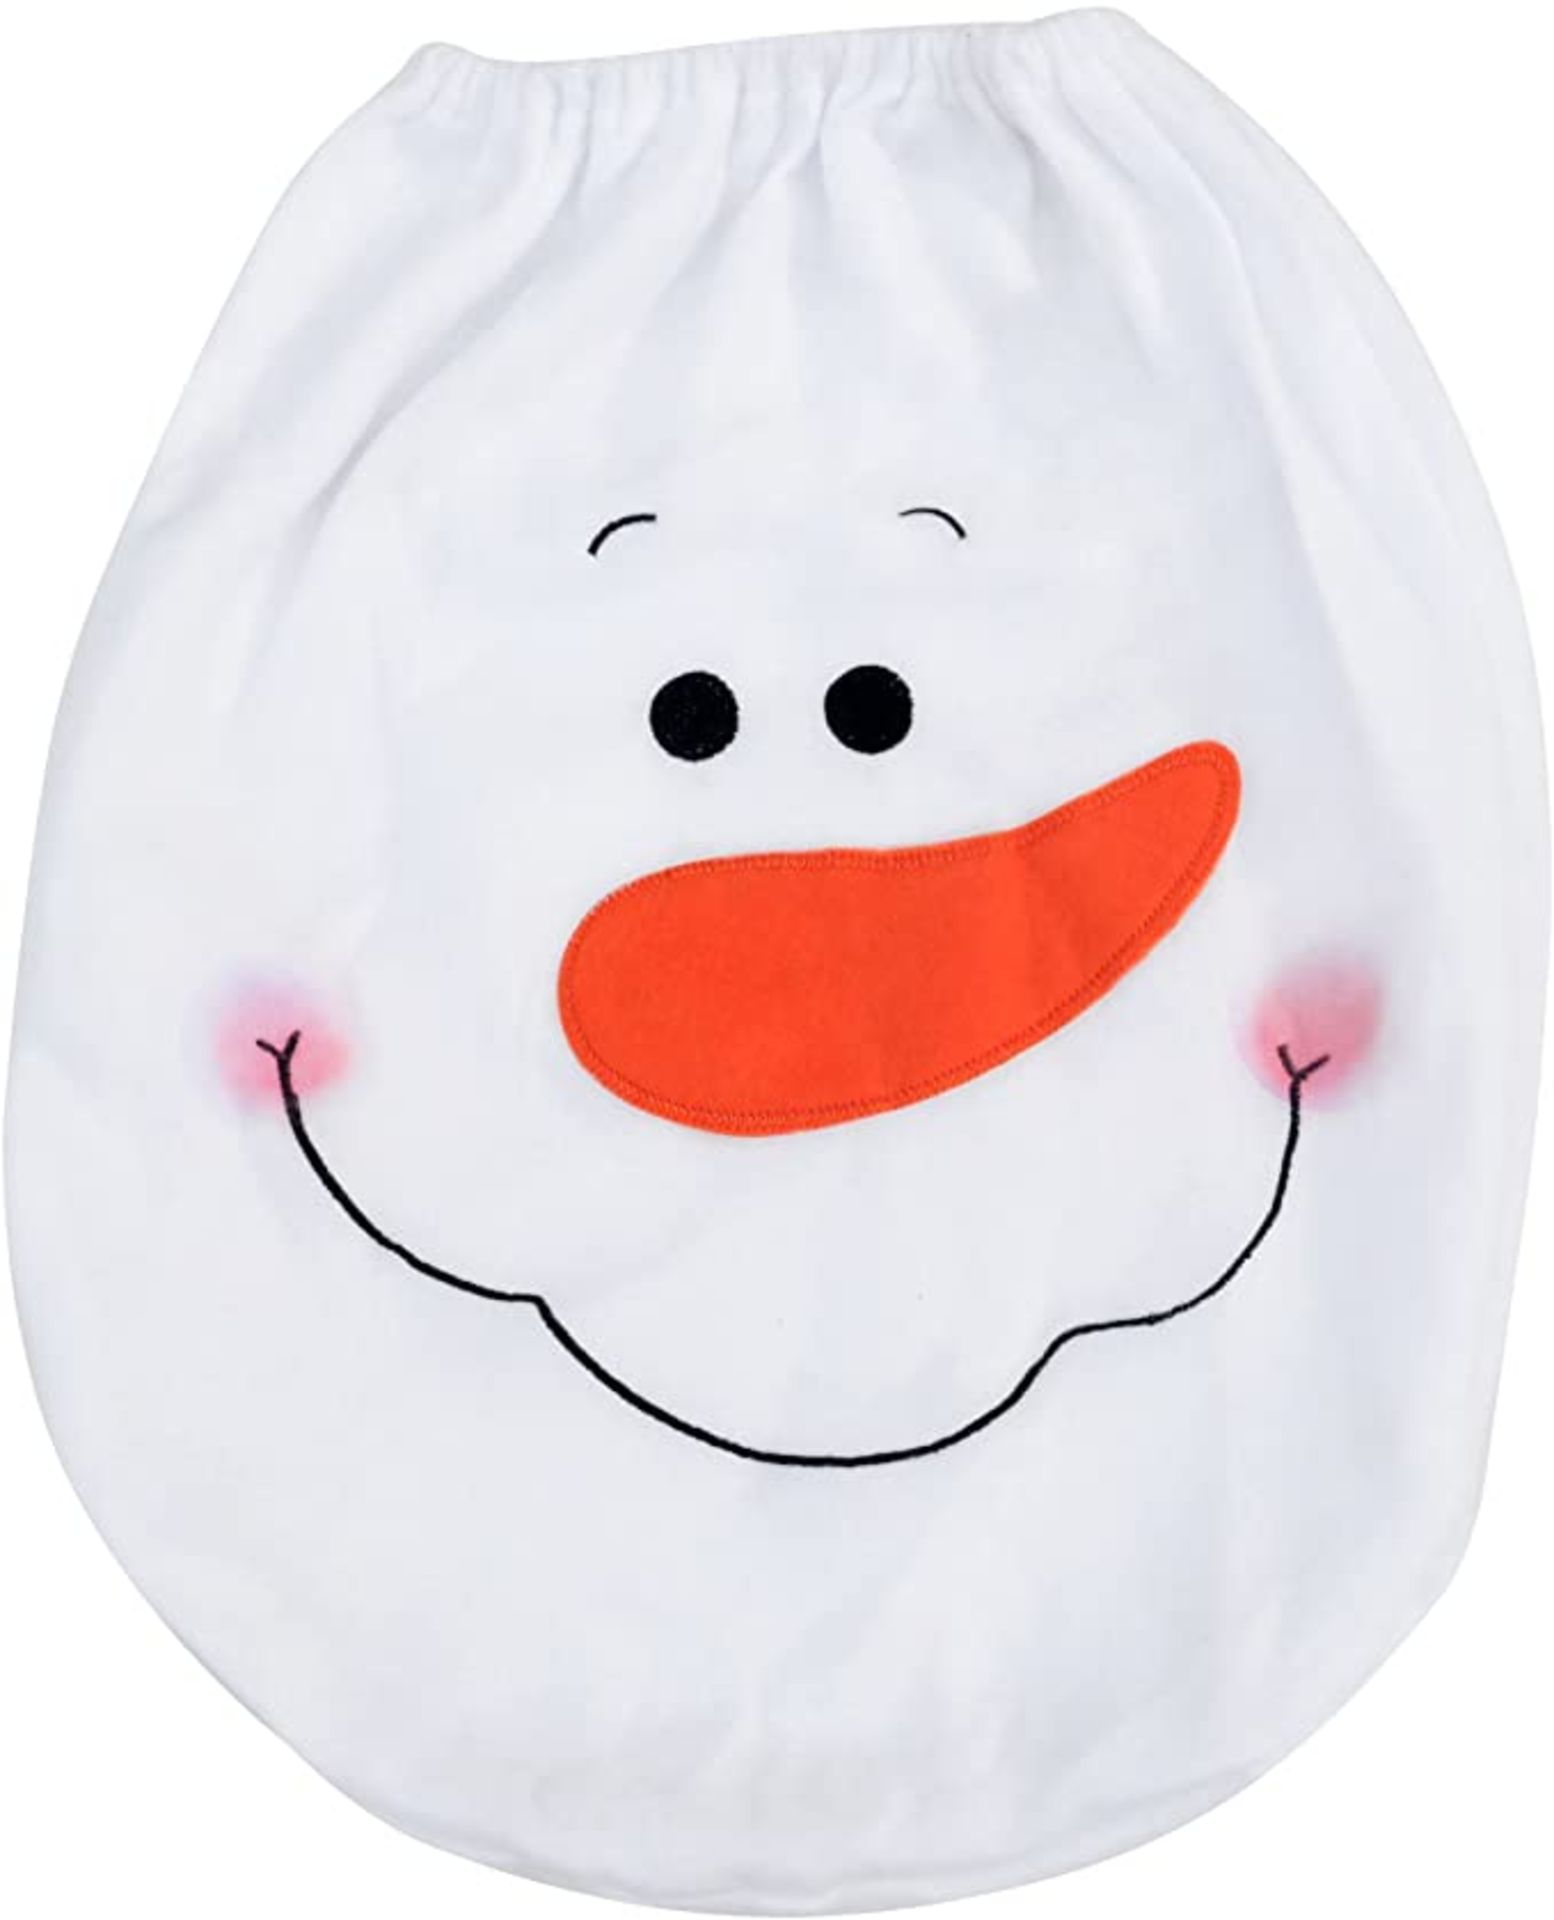 5 x Snowman Toilet Seat Cover, Cistern Cover And Rug Set - Image 4 of 6